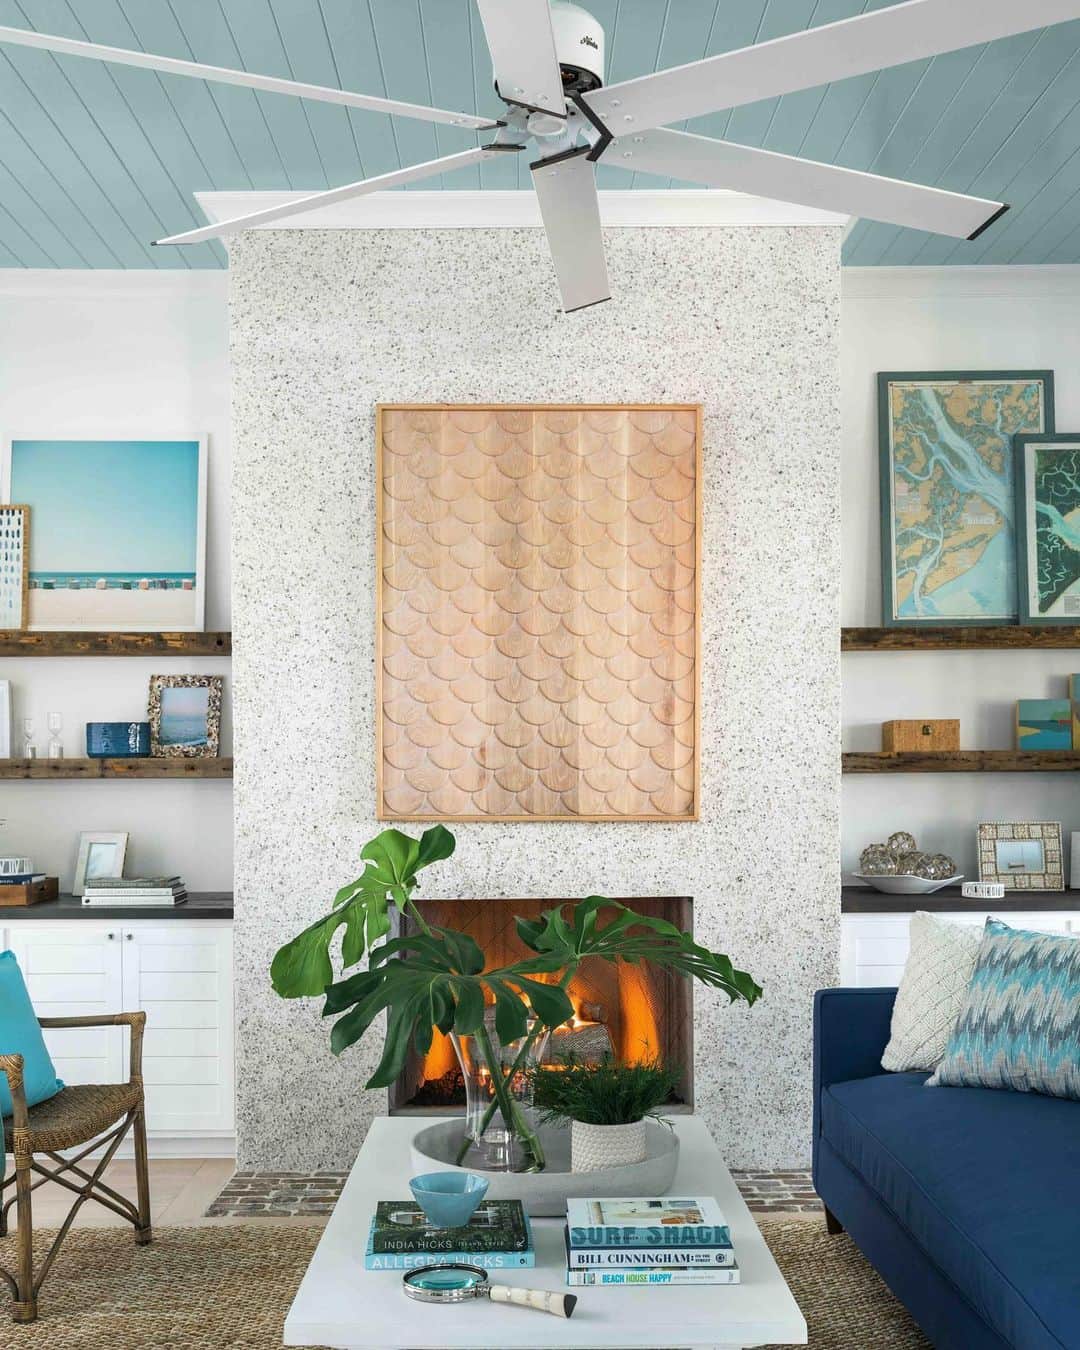 HGTVさんのインスタグラム写真 - (HGTVInstagram)「🔔 HGTV Dream Home 2021 sweepstakes ends one week from today! ⏰ In honor of the 25th anniversary of #HGTVDreamHome, we asked designer Brian Patrick Flynn (@bpatrickflynn) about his favorite spaces from the homes he's designed.⁠ ⁠ 🌞 DH21: I love the beautiful light coming in from the two-story window and the Americana palette.⁠ ⁠ 🏄‍♀️ DH16: The vintage surfing mural is my all-time favorite design feature of any house I've done. It captures the lifestyle and culture of the area.⁠ ⁠ 👨‍🍳 DH17: My all-time favorite kitchen from any of the HGTV Dream Homes is the forest green kitchen on St. Simons Island, GA. People had mixed reactions to the color since it was very popular in the '90s, and now, KAZAM! all things '90s seem to be leading the design revolution in 2021.⁠ ⁠ 🌅 DH18: As far as curb appeal goes, Gig Harbor, WA will always be the one I remember most. The jet black exterior with modern lines against the Puget Sound was Pacific Northwest living at its finest. ⁠ ⁠ 🦪 DH20: I've done a lot of fireplaces for HGTV Dream Home, but the most unique will always be the tabby one on Hilton Head Island, SC. It's a popular application of crushed oyster shells mixed with cement for a beautiful texture.⁠ ⁠ 💧 DH20: The most amazing HGTV Dream Home pool that I've designed was in Hilton Head Island, SC. It was so manicured and had a black lining, which added a high level of sophistication.⁠ ⁠ 🌲 DH18: The Whitefish, MT living room could very well be the most spectacular space I've ever worked on. The view of the trees and the lake and the mountains, there's just nothing else like it. And the warm tones and the upholstered faux moose head captured the magic of living in Montana during the fall.⁠ ⁠ 🎨 DH17: I think this is the most "me" space out of all of the HGTV Dream Homes. It was curated with art and unique bespoke pieces and had the elevated look people aim for in the area.⁠ ⁠ What's your favorite HGTV Dream Home space? 💭 ⁠ ⁠ Enter for your chance to win HGTV Dream Home 2021 at the link in our profile. 🔝⁠ ⁠ NO PURCHASE NECESSARY. Ends 2/17. To enter and for more details, click on the link in our profile or visit HGTV.com/Dream⁠  📸 @rusticwhiteinteriors」2月11日 1時57分 - hgtv